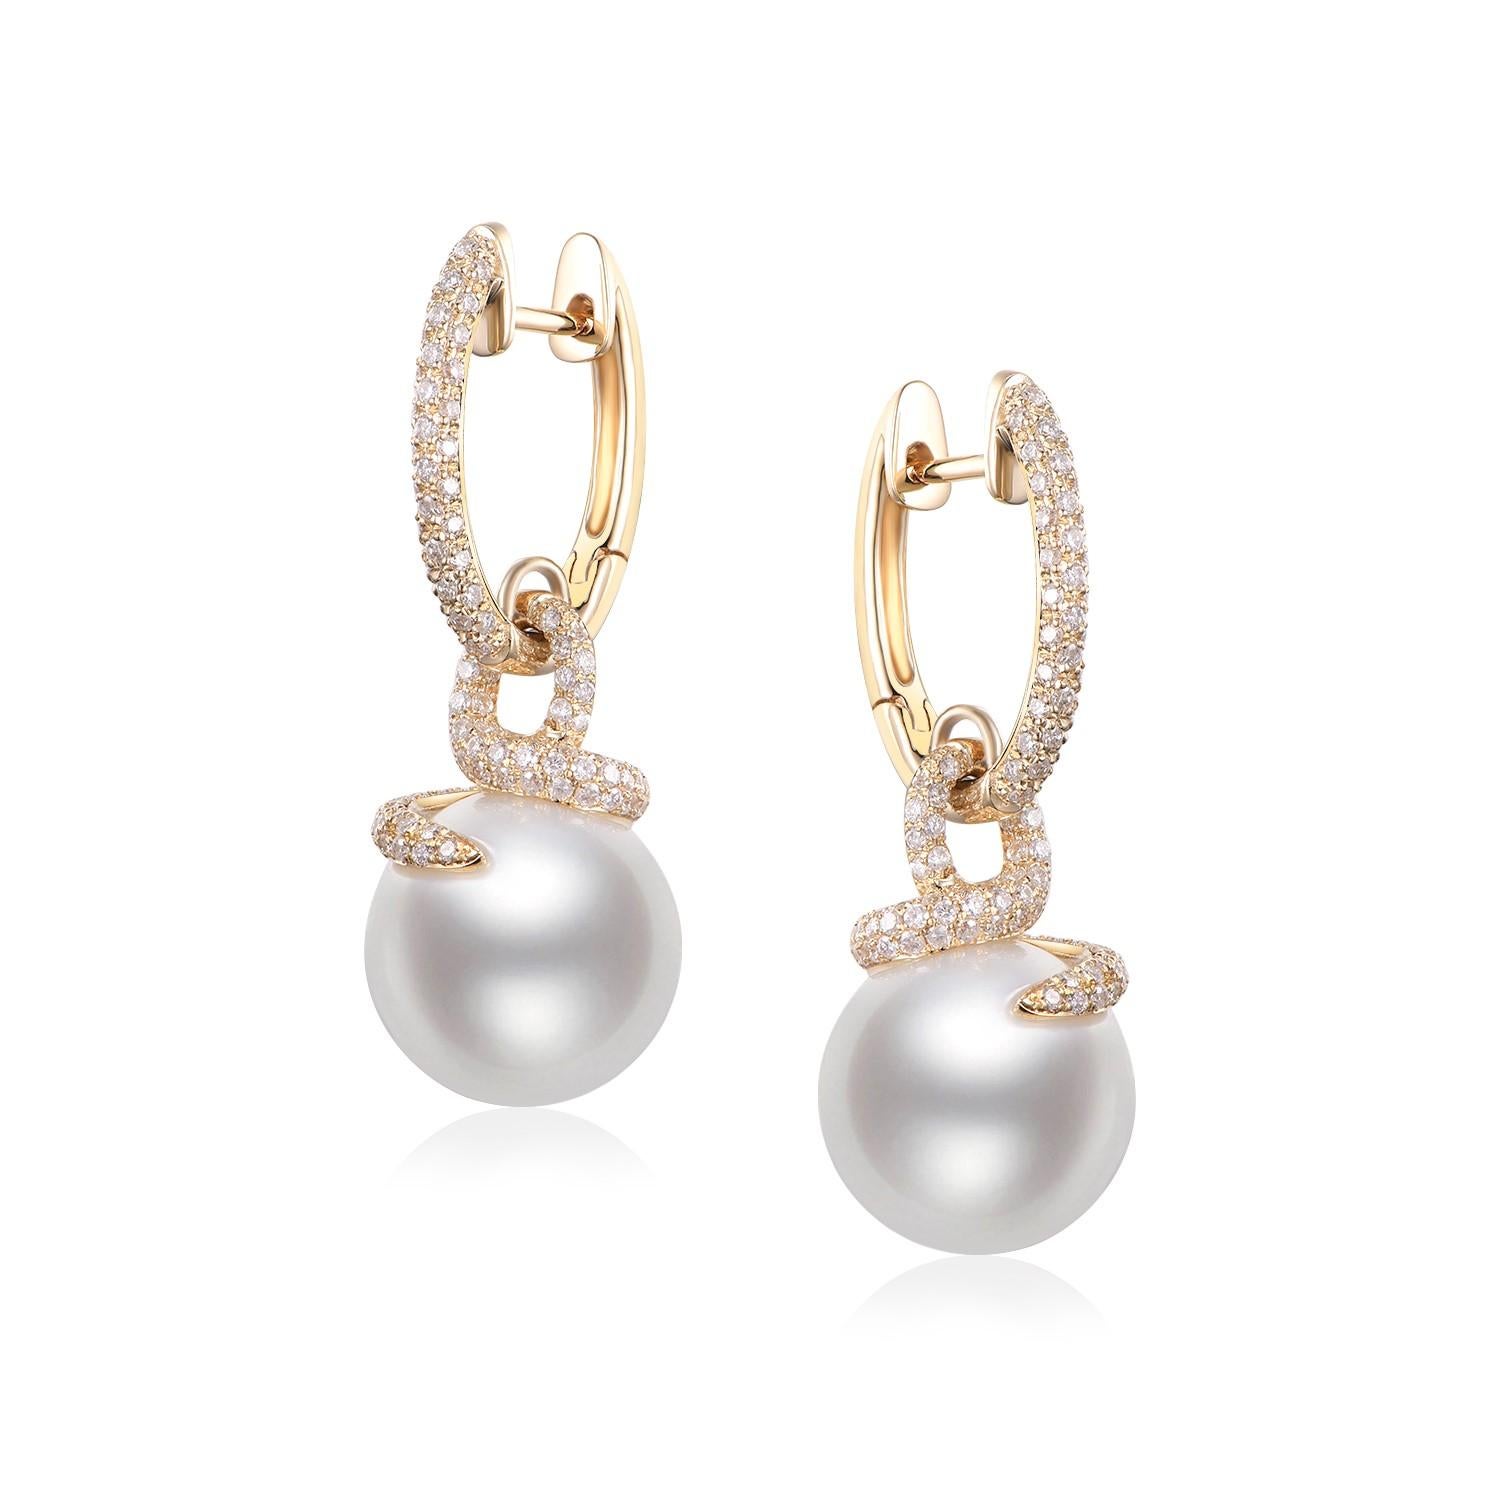 The South Sea Pearl Diamond Drop Earrings, beautifully set in 14 Karat Yellow Gold, are a timeless testament to the delicate dance between nature's majesty and human artistry. Each earring boasts an impressive 12mm South Sea pearl, known worldwide